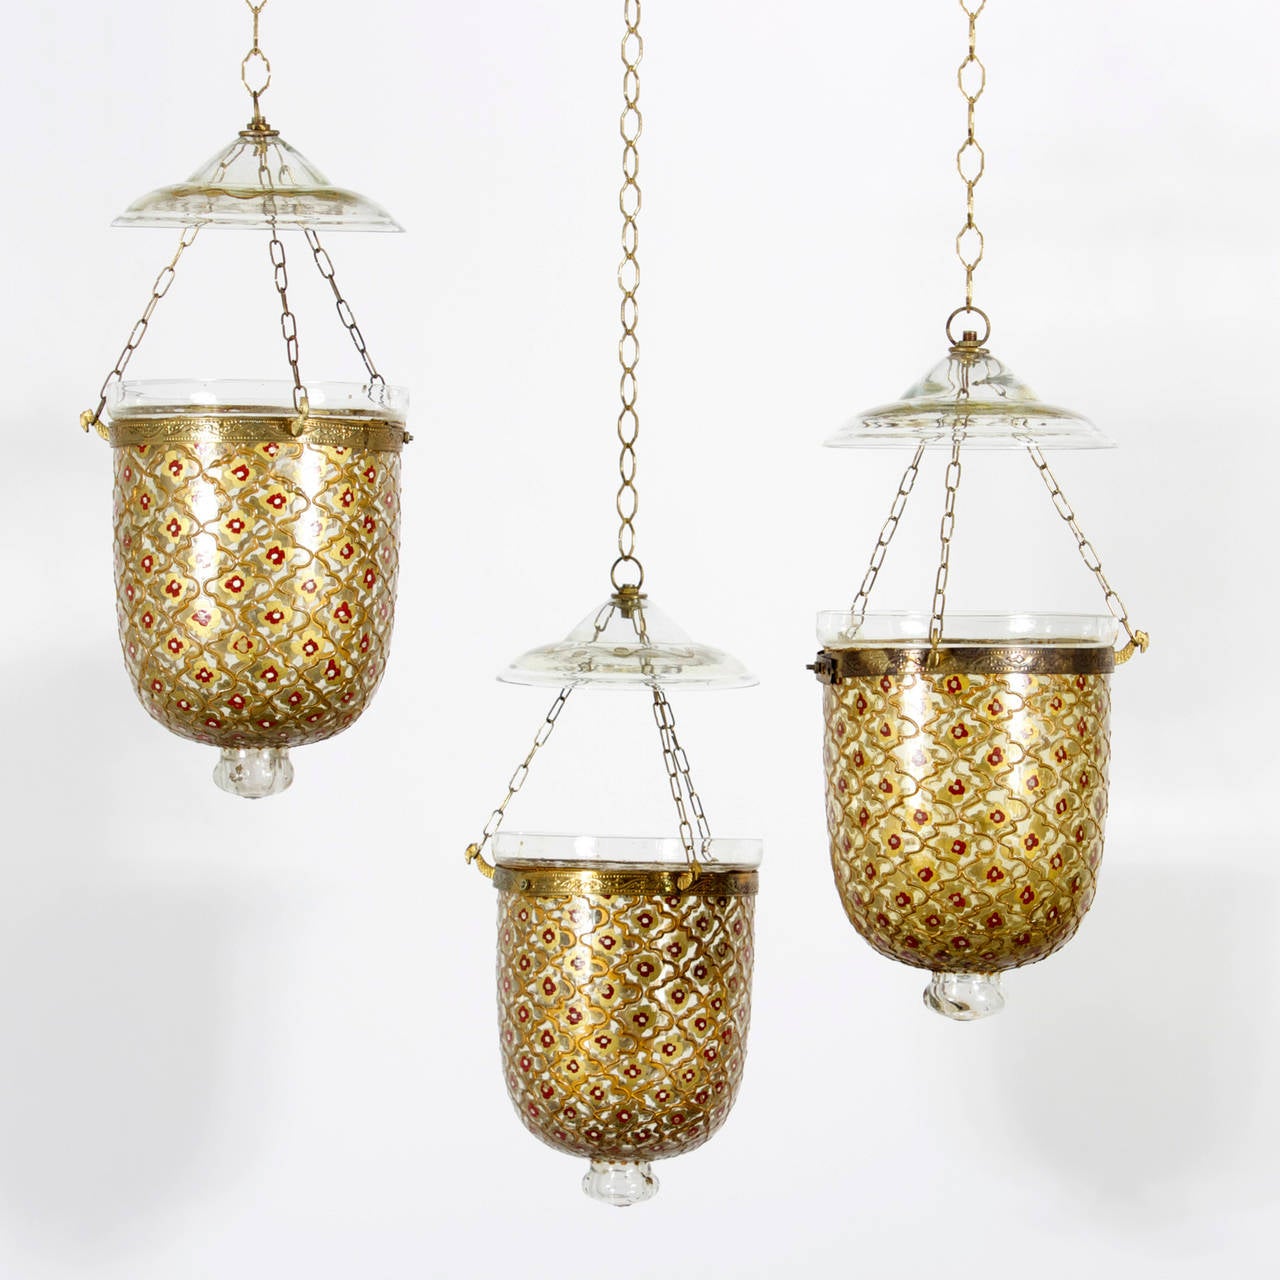 Exotic Anglo Indian bell jar candle lanterns or pedants decorated with red flowers inside gold cartouches and having brass bands with camel heads chained to  shaped and decorated smoke bells. 10 available. Priced Individually.